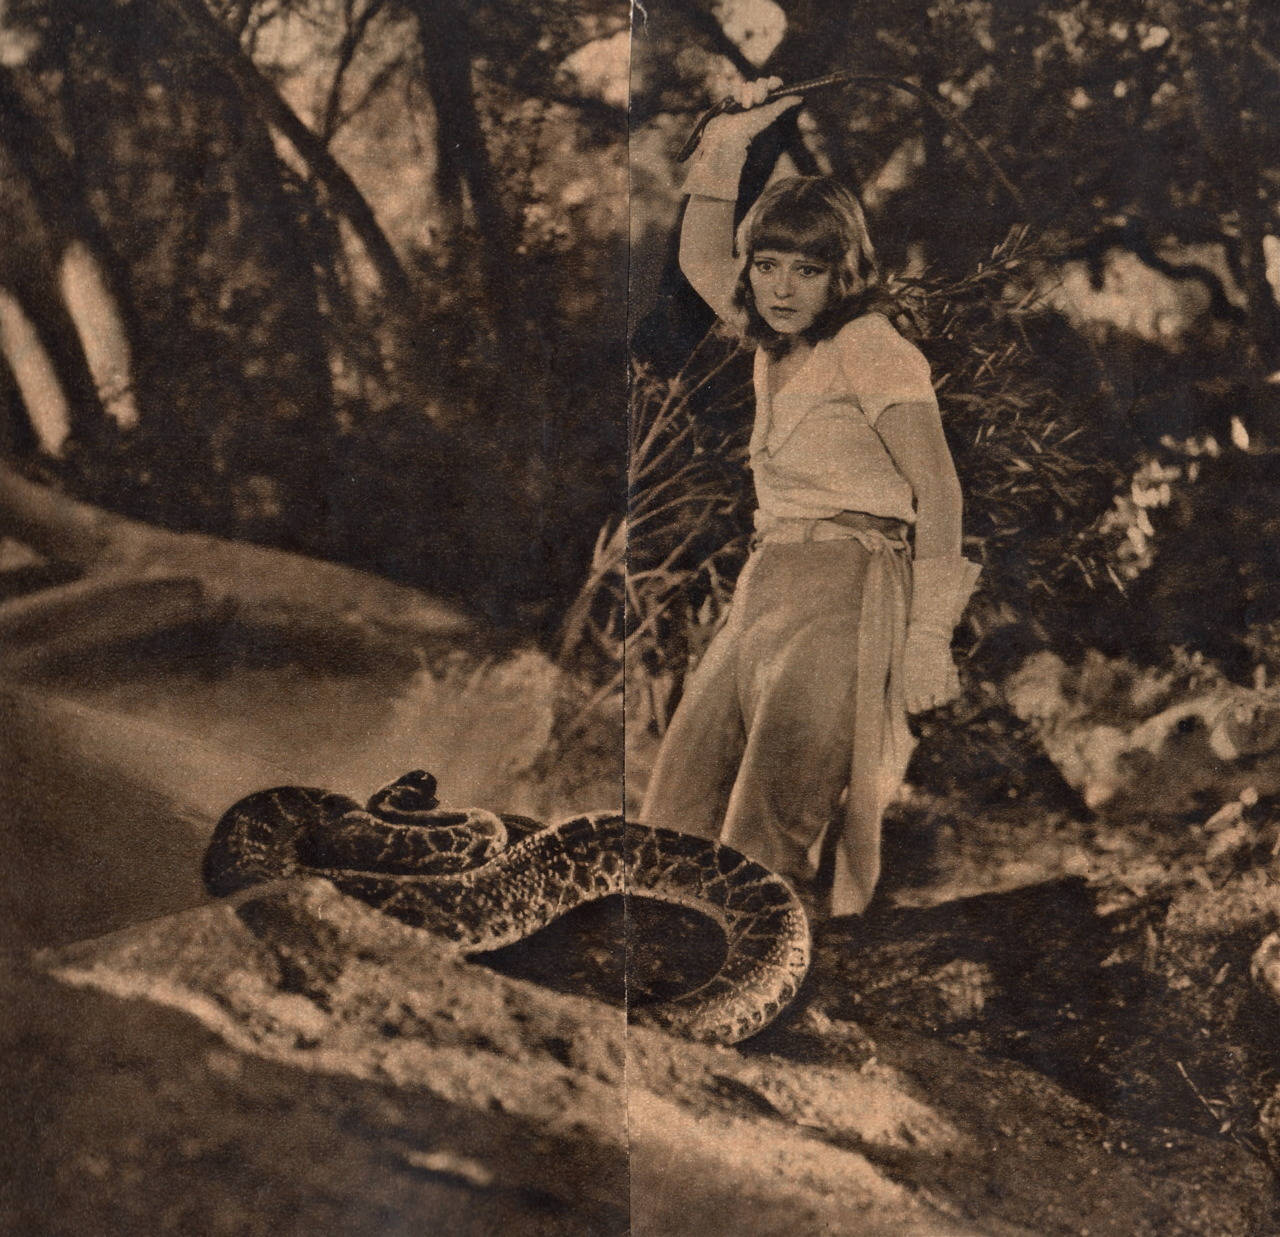 Clara Bow Enthralling With A Giant Snake